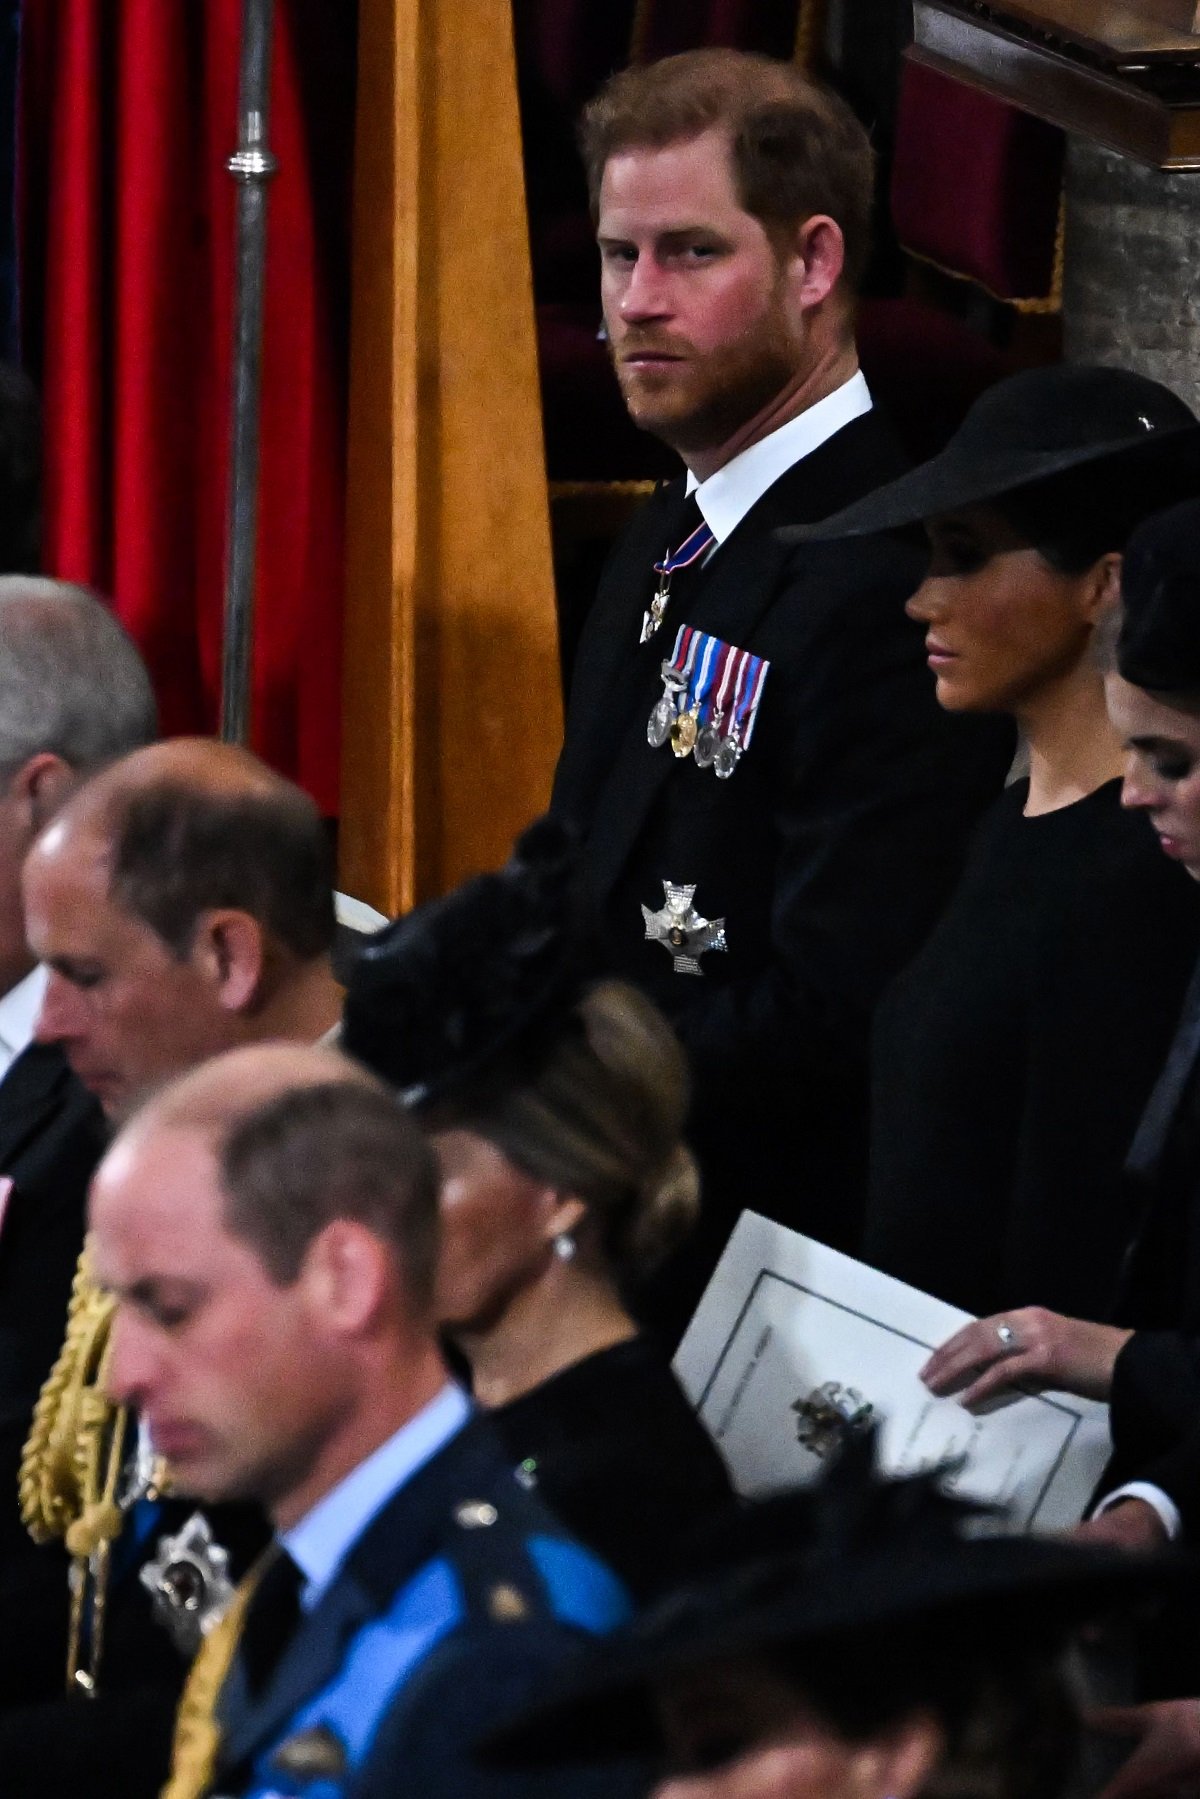 Prince Harry glaring at the camera in the second pew next to Meghan and behind working royals at Queen Elizabeth II's funeral